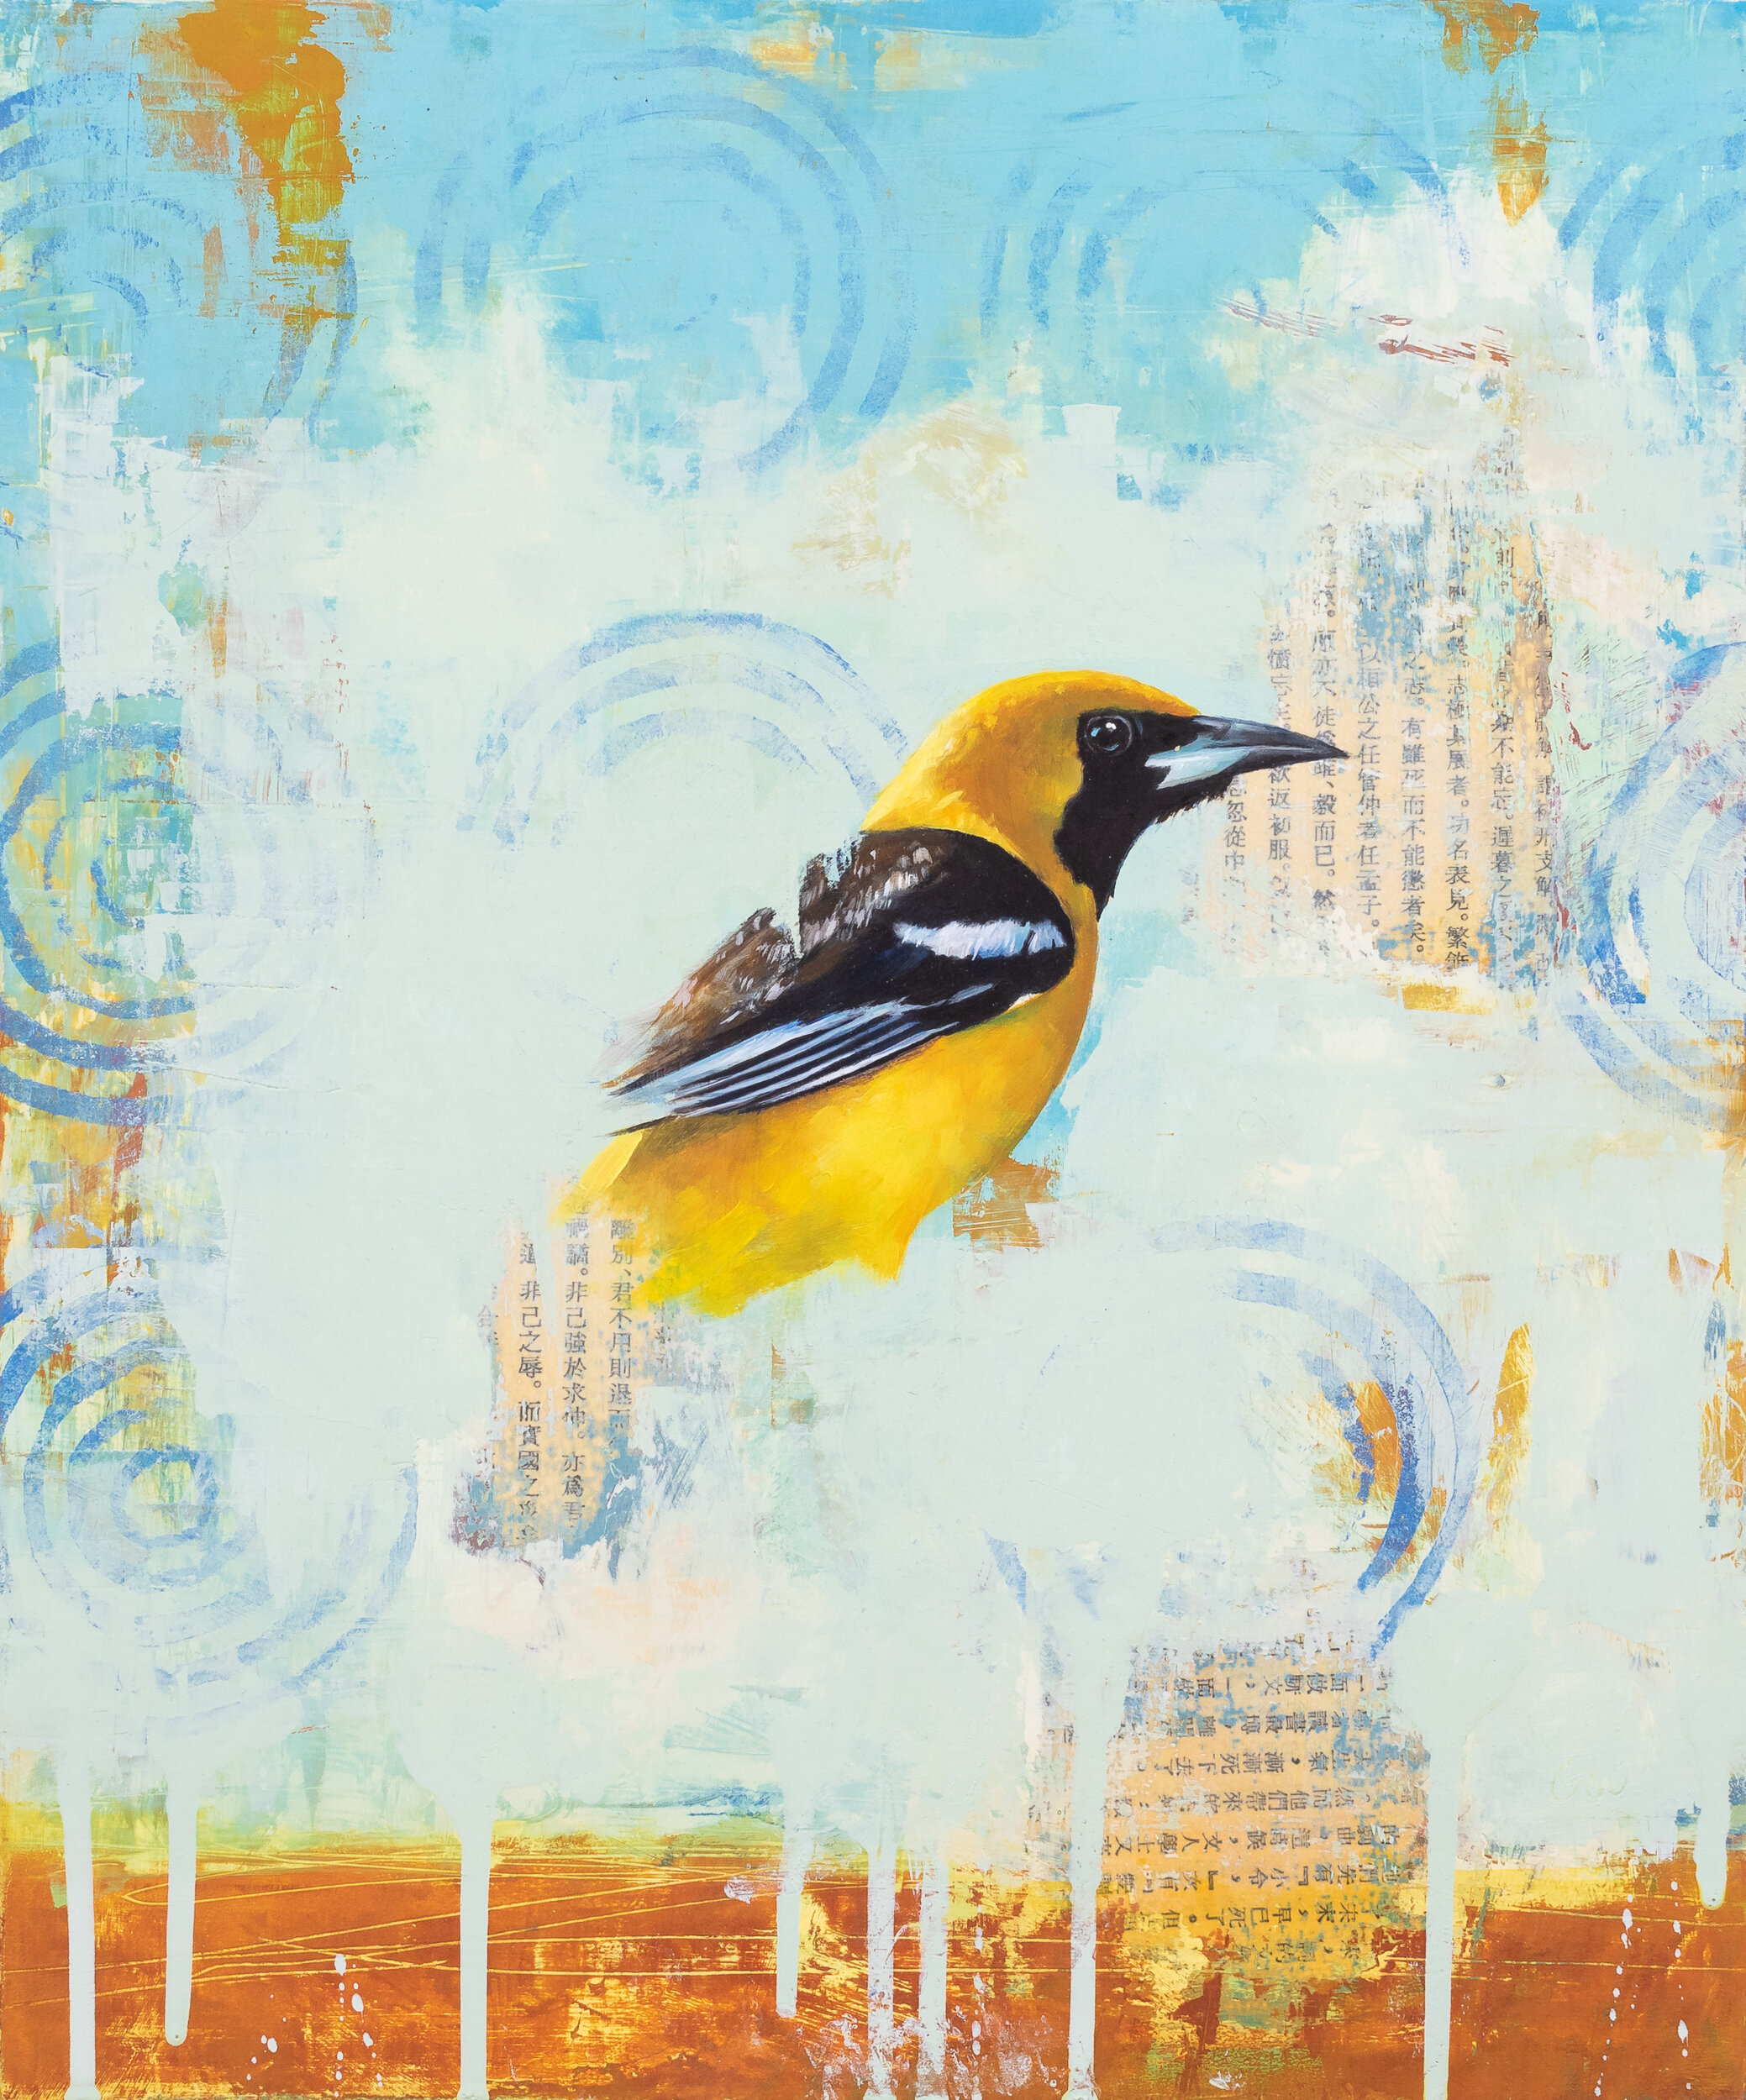   Oriole Daydreams  2021 oil and collage on panel 12 x 10 inches    